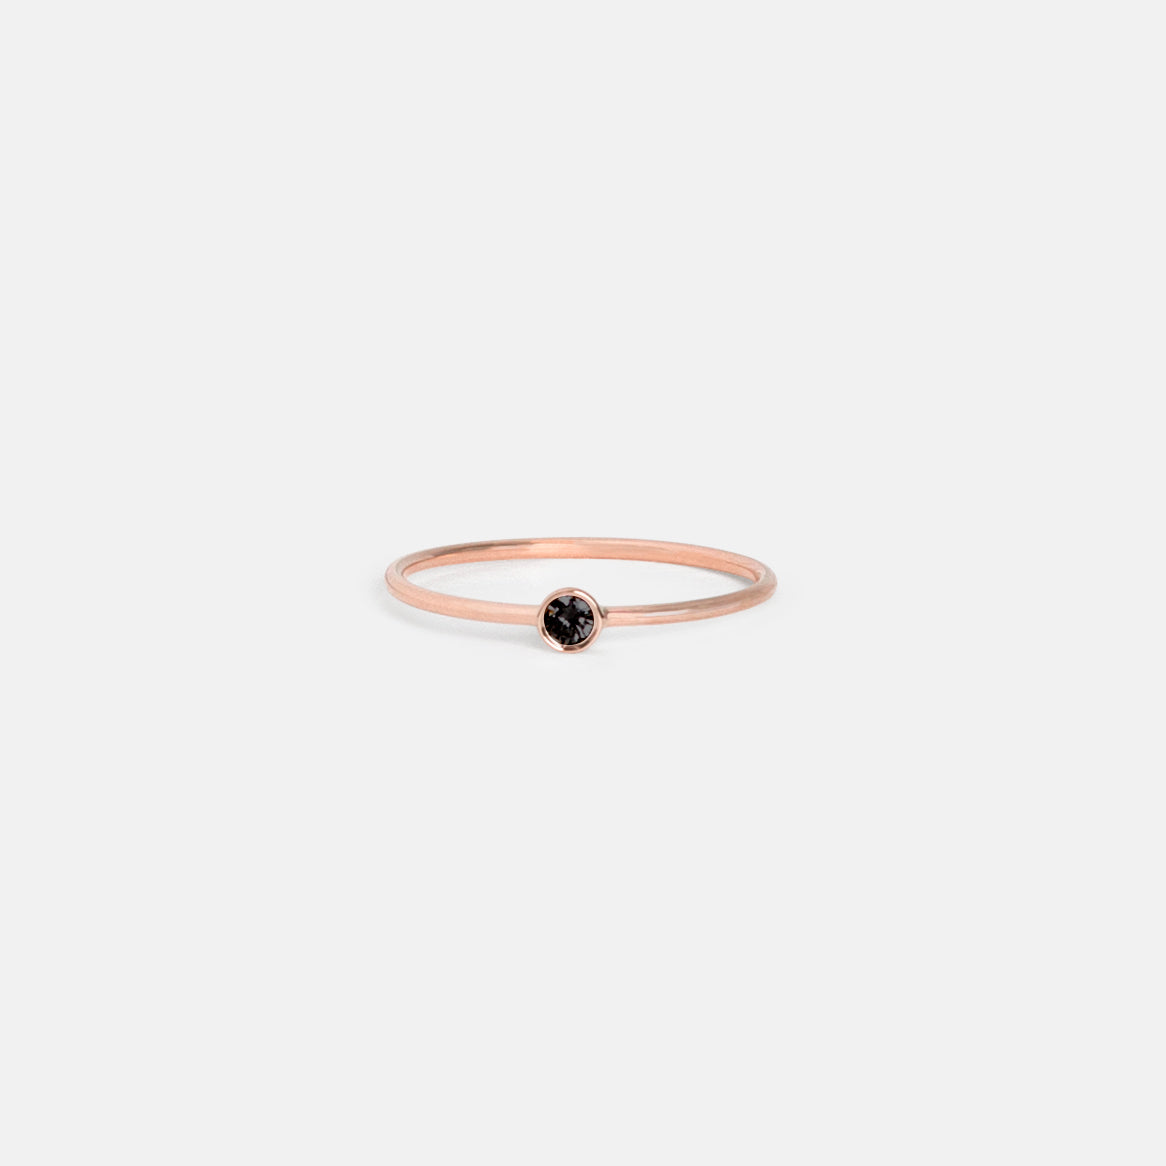 Minimal Large Kaya Ring in 14k Rose Gold set with Black Diamond by SHW Fine Jewelry in NYC